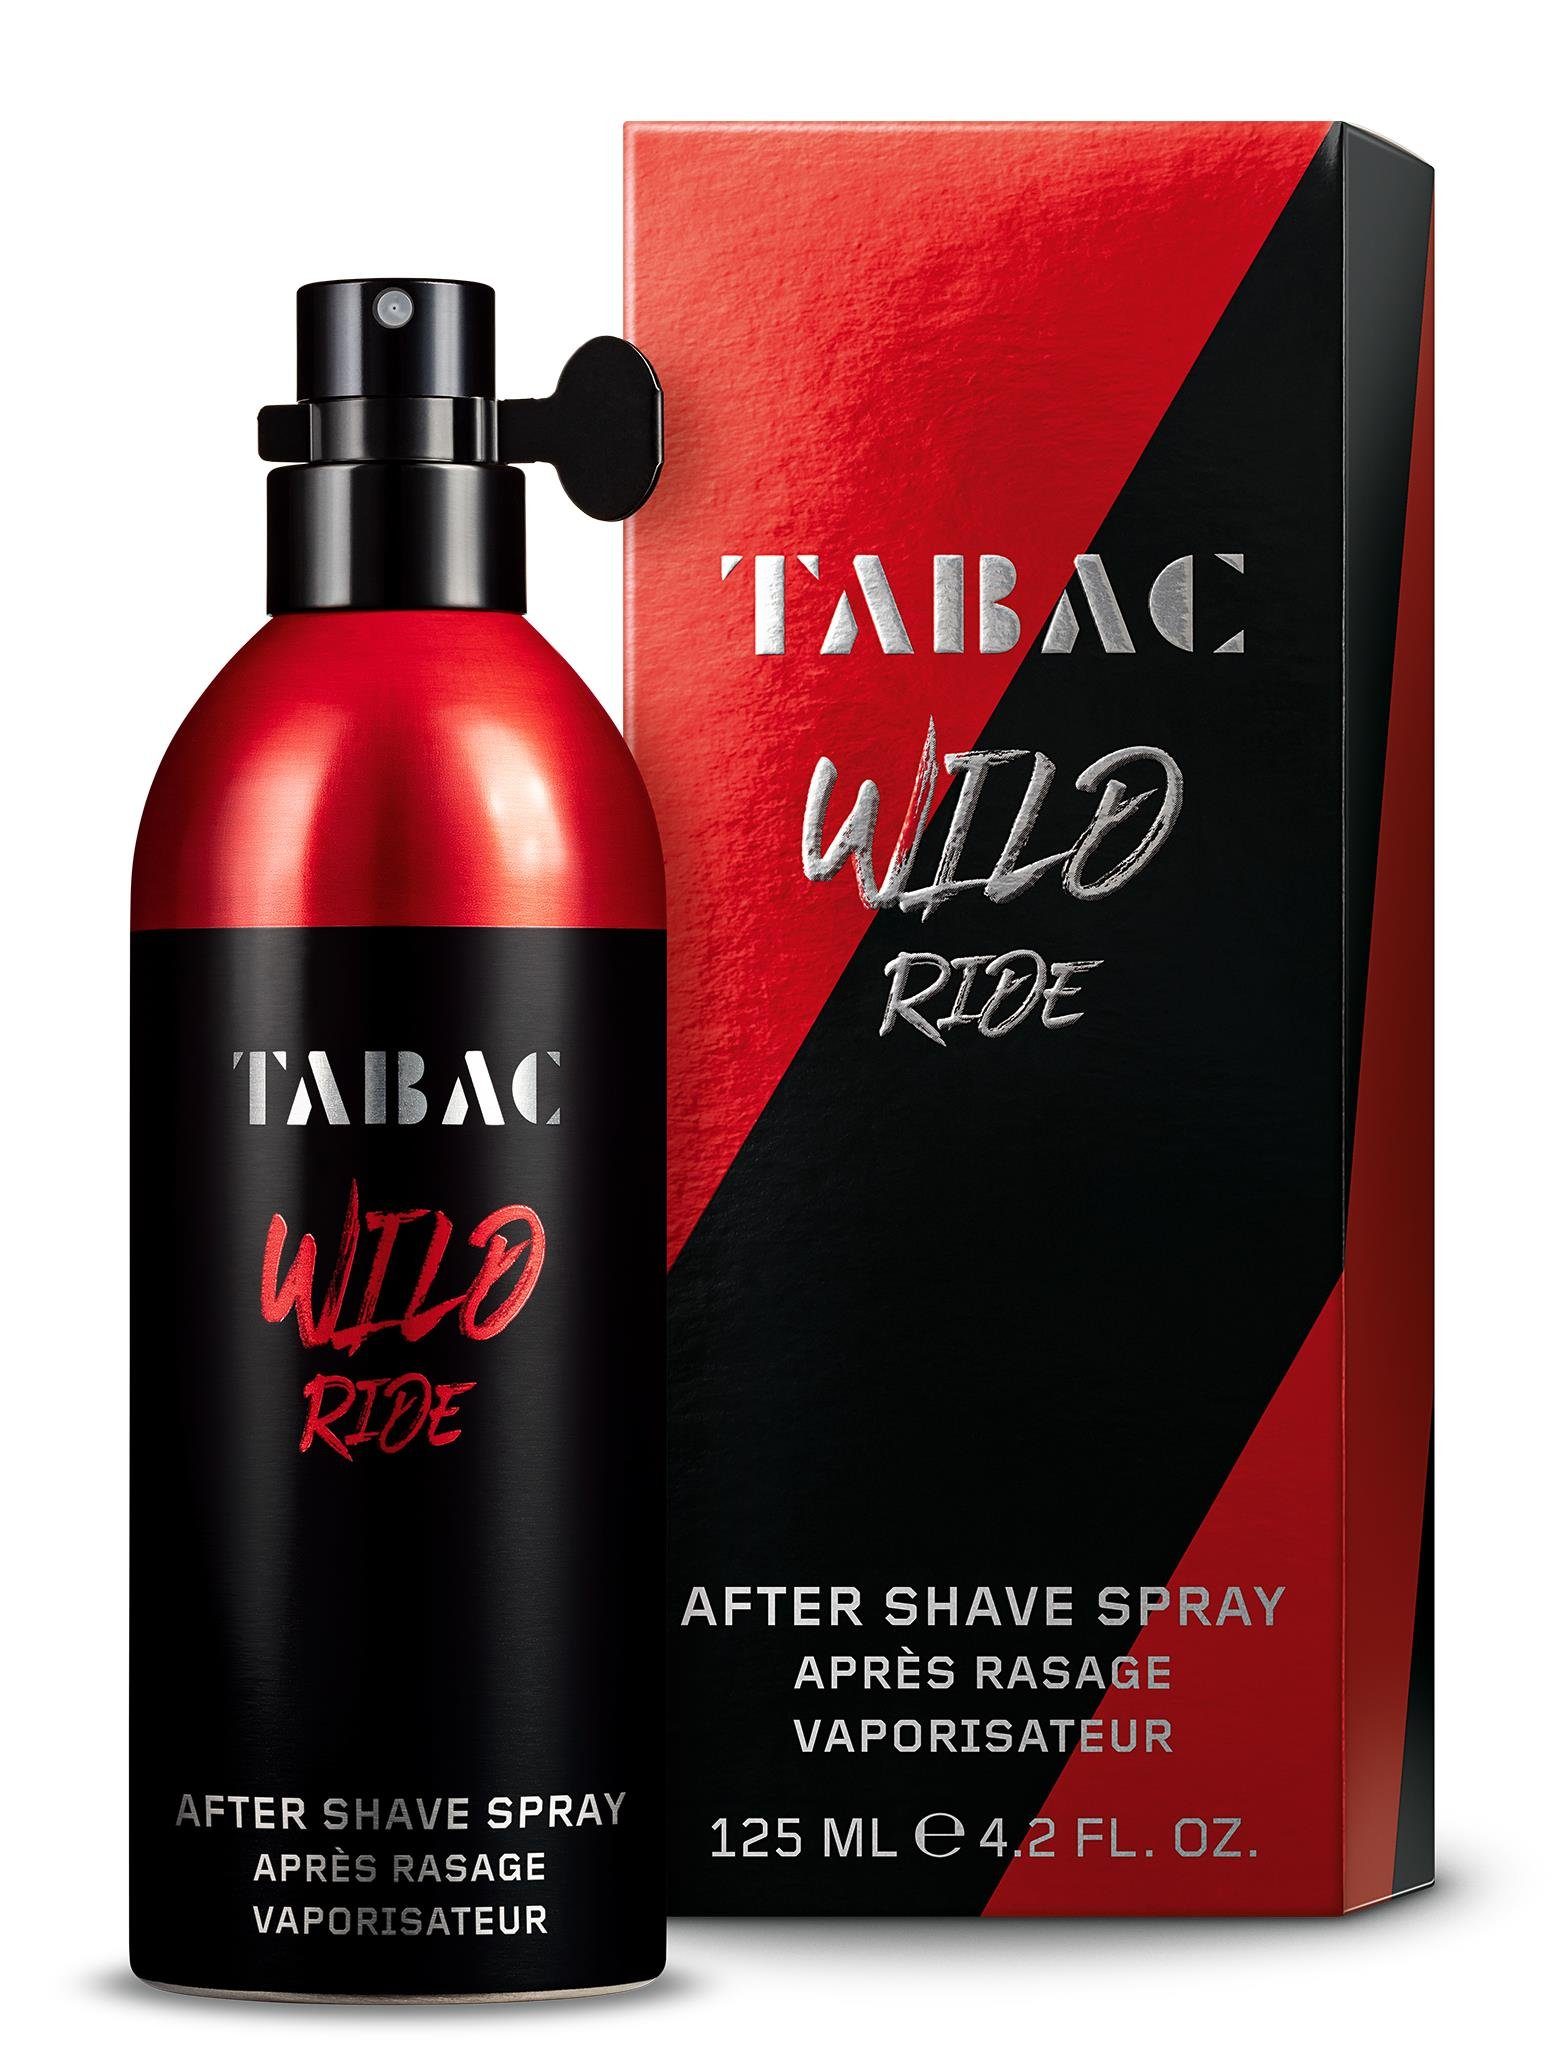 Tabac Tabac Shave Wild Ride After Gesichts-Reinigungslotion ml Lotion Wild Ride 125